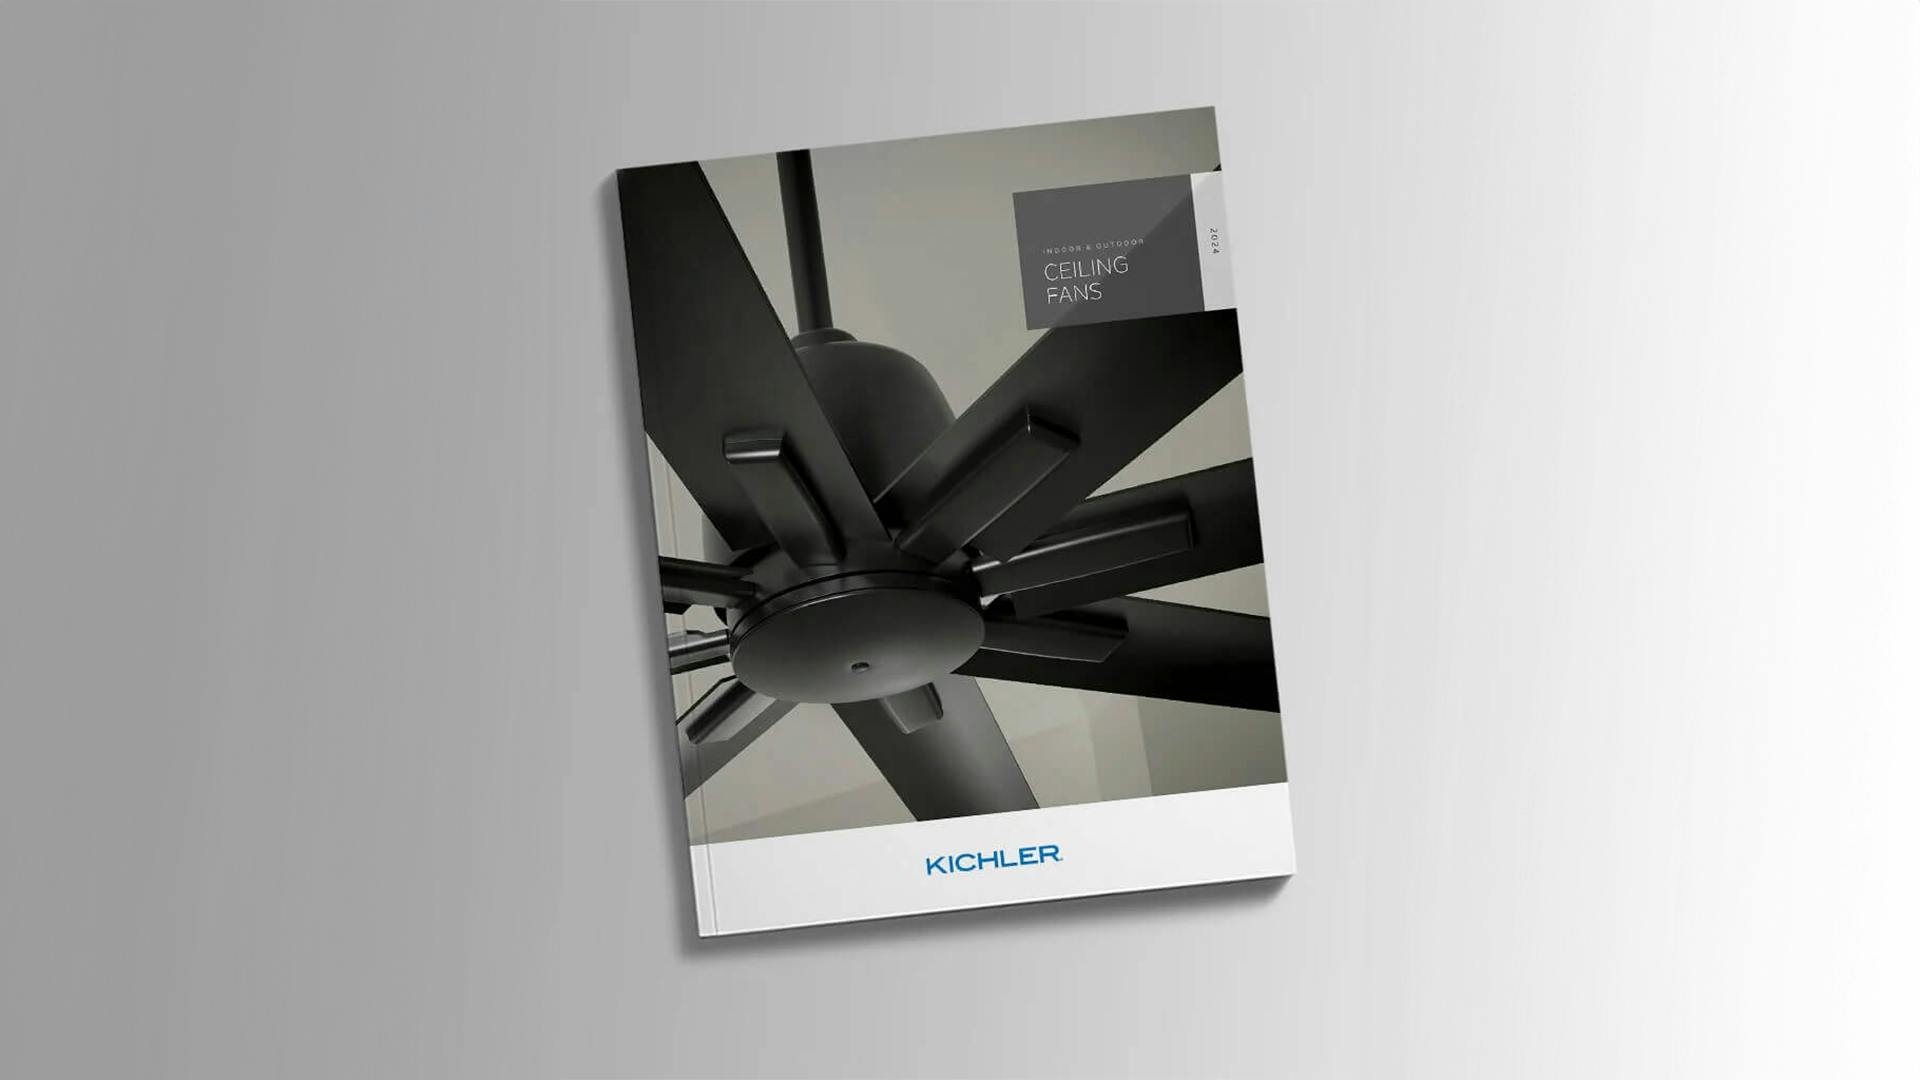 Catalog with a black ceiling fan on the cover and titled ceiling fans